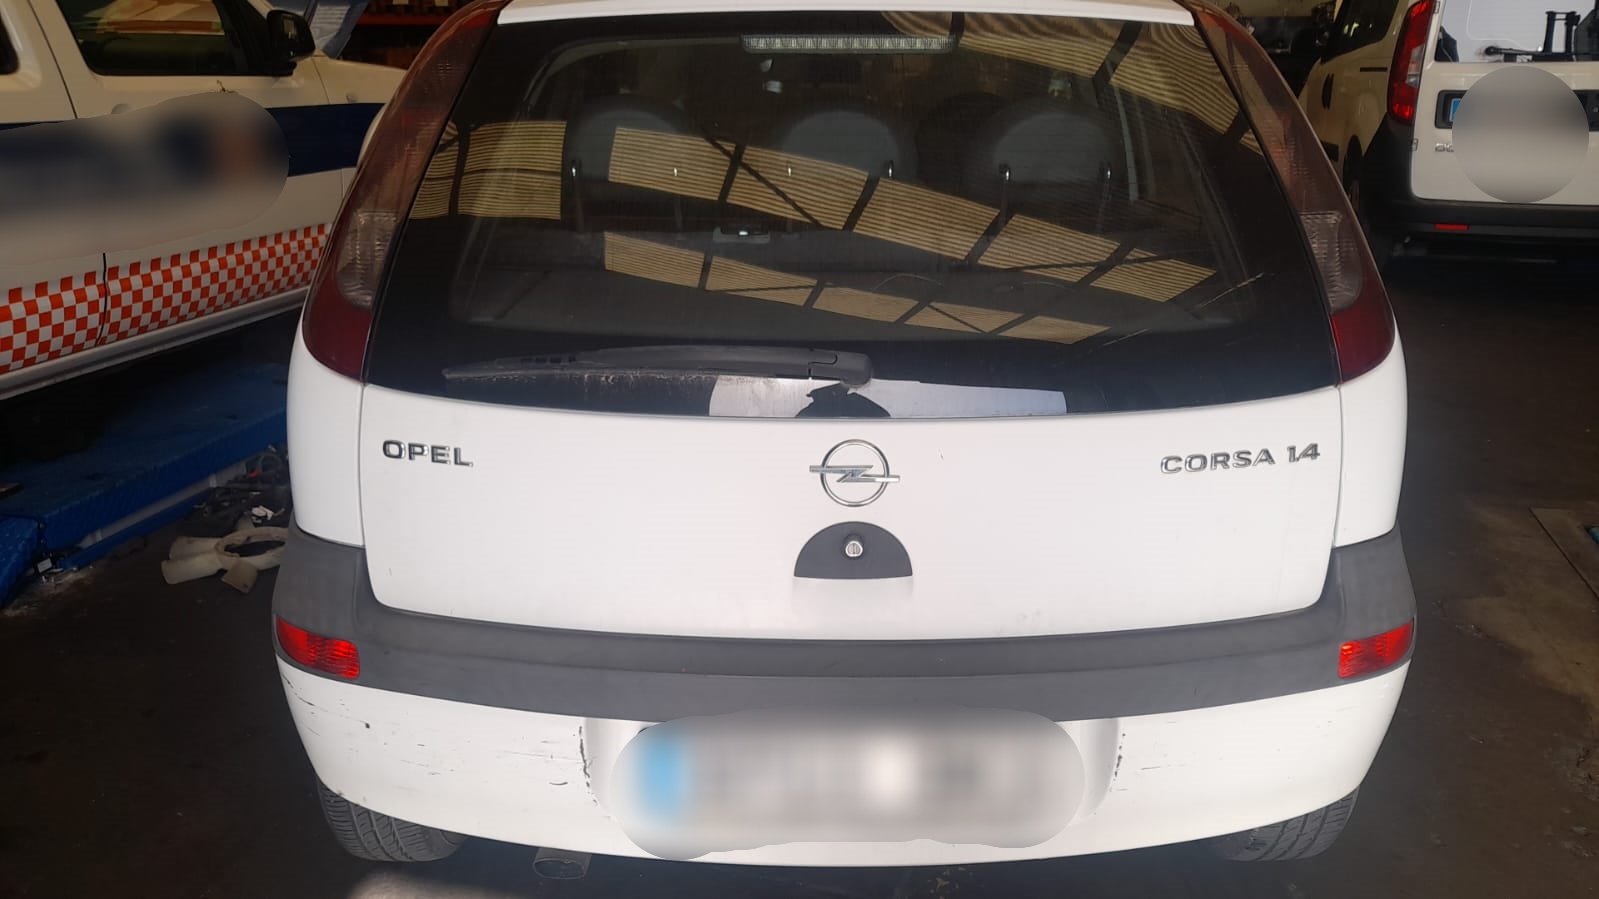 OPEL Corsa C (2000-2006) Other Control Units 228216001013, 9227844 24463467